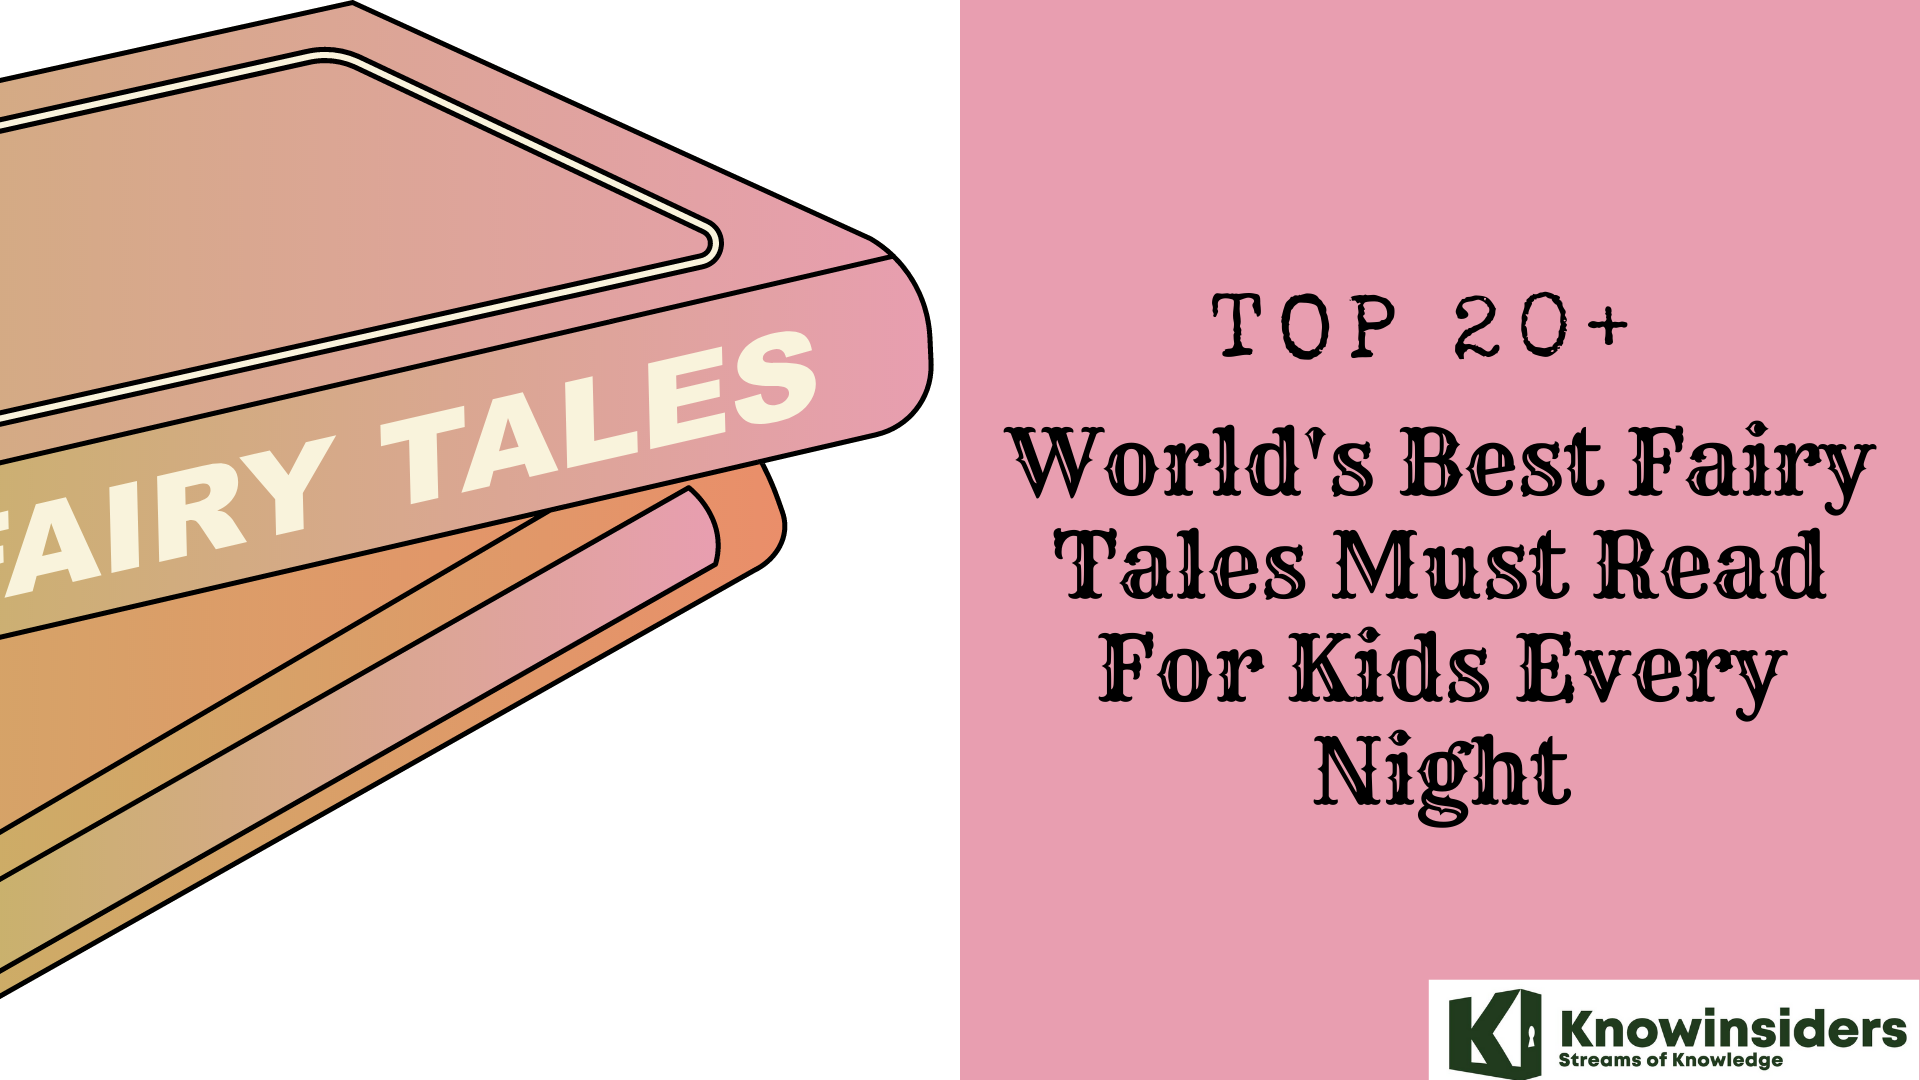 Top 20+ World's Best Fairy Tales (Full Text) Must Read For Kids Every Night